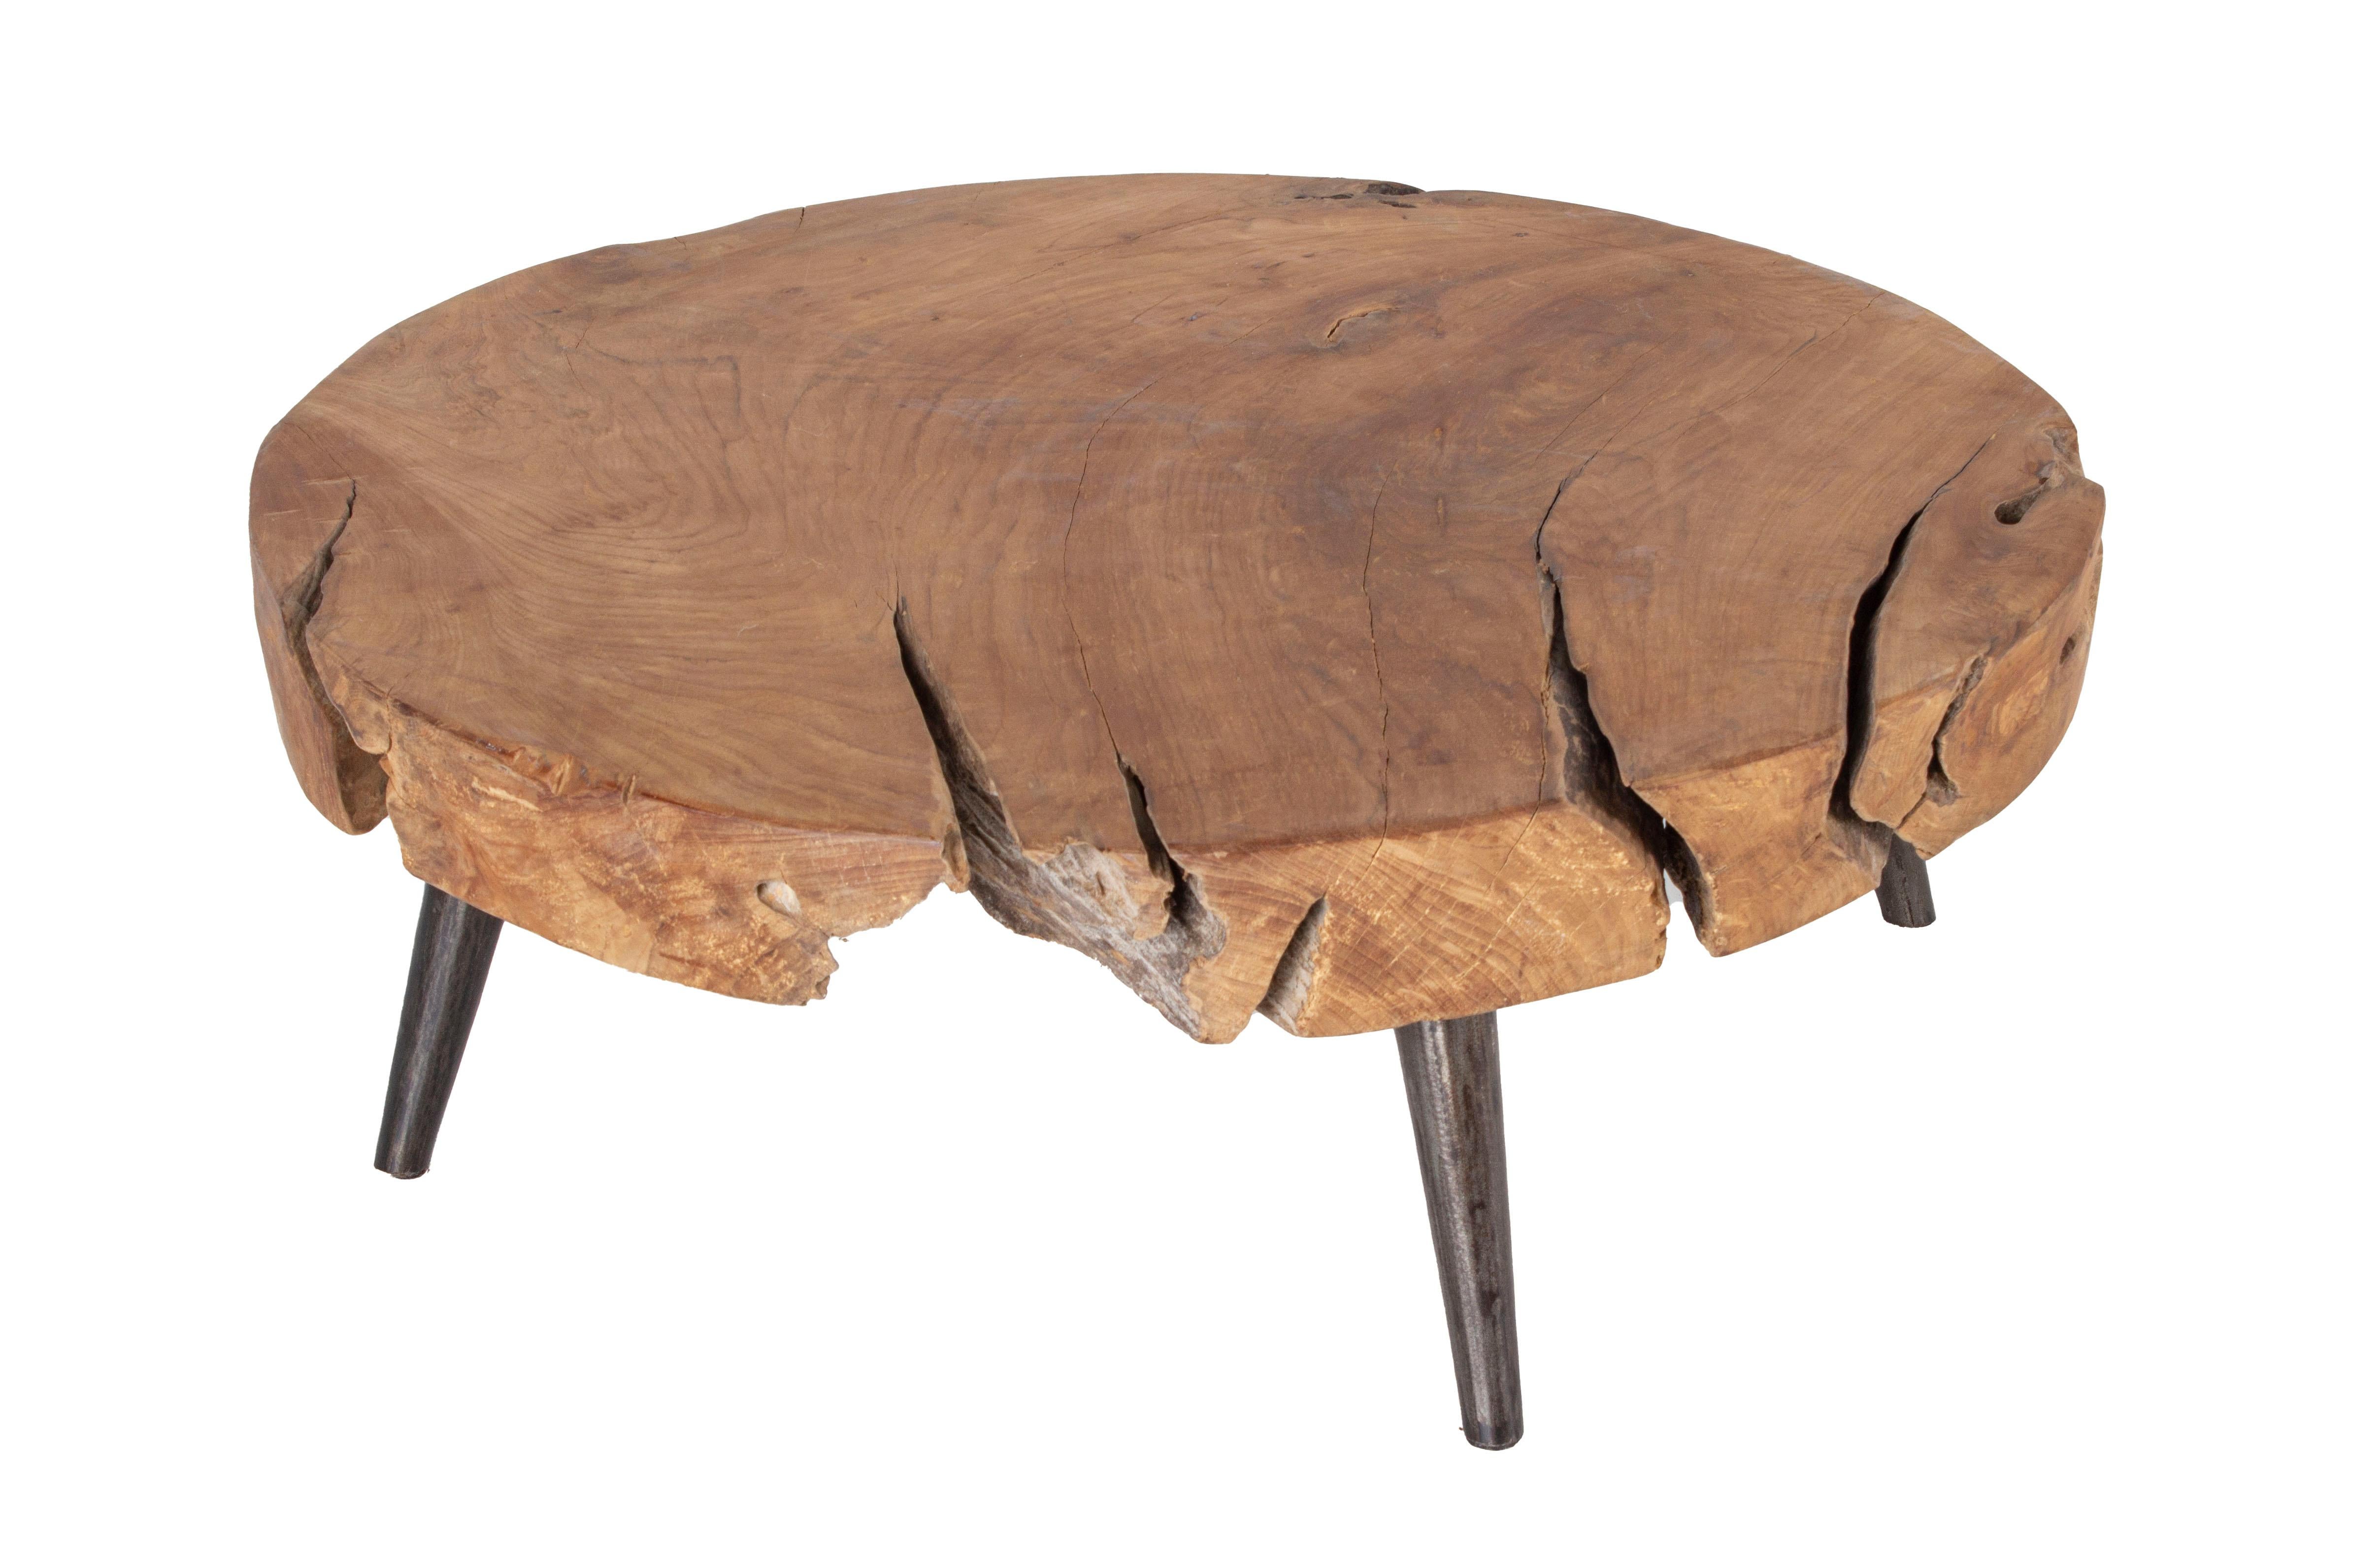 Organic form teak coffee table

Imported from Europe by our sourcing team. One of a kind piece.